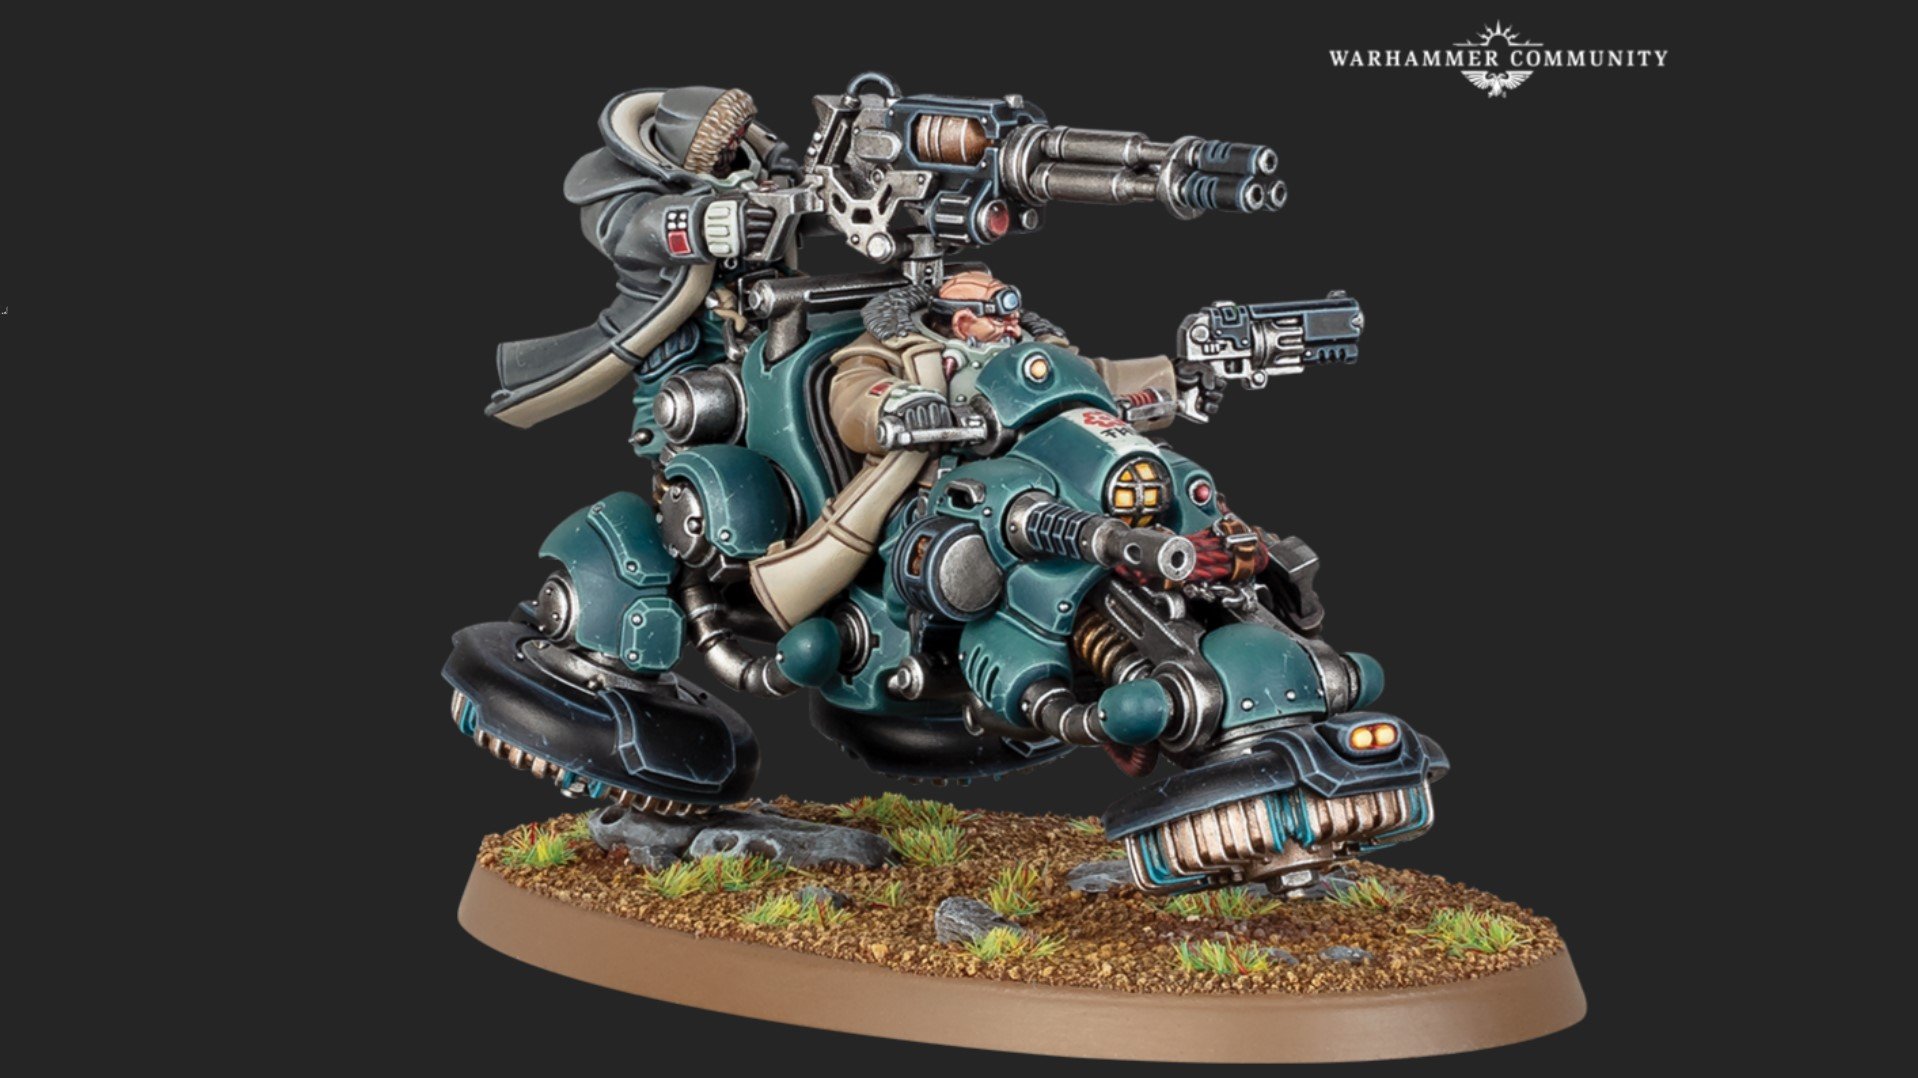 Warhammer 40k Hernkyn Pioneers are now a trike-riding trio